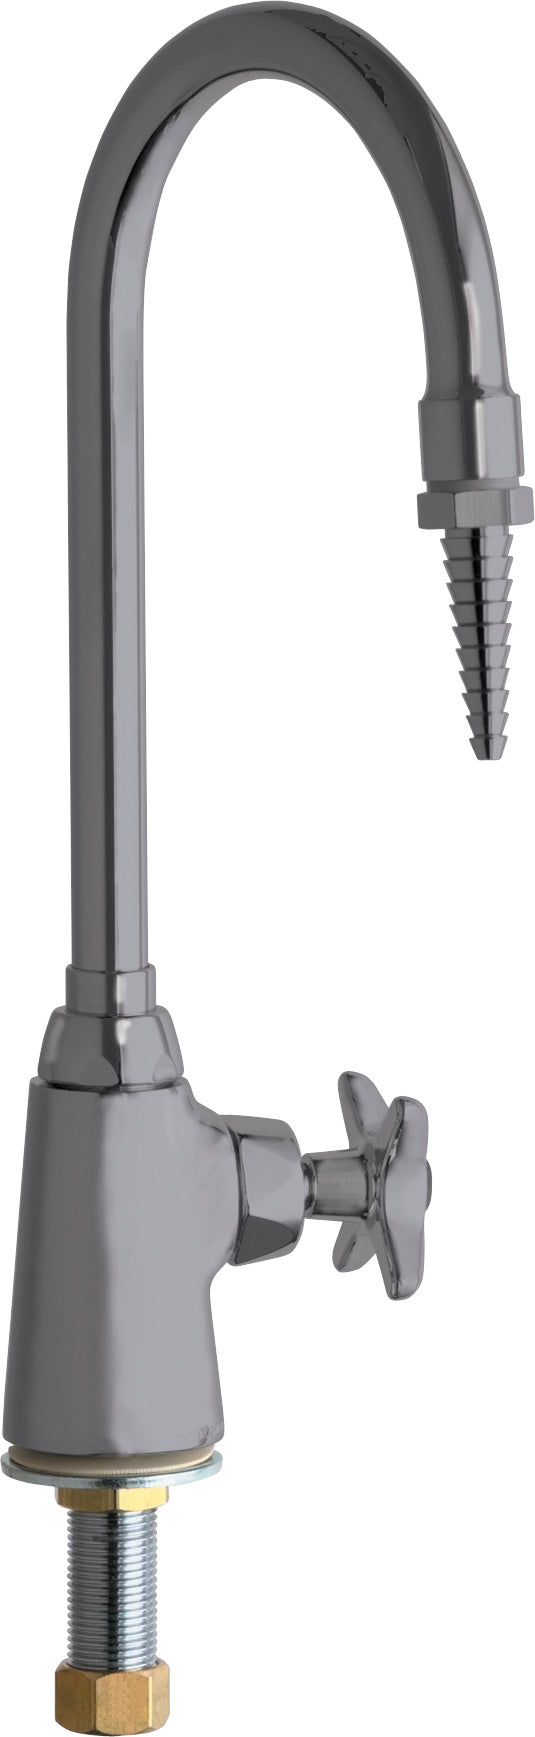 Chicago Faucets Laboratory Sink Faucet 927-SAM